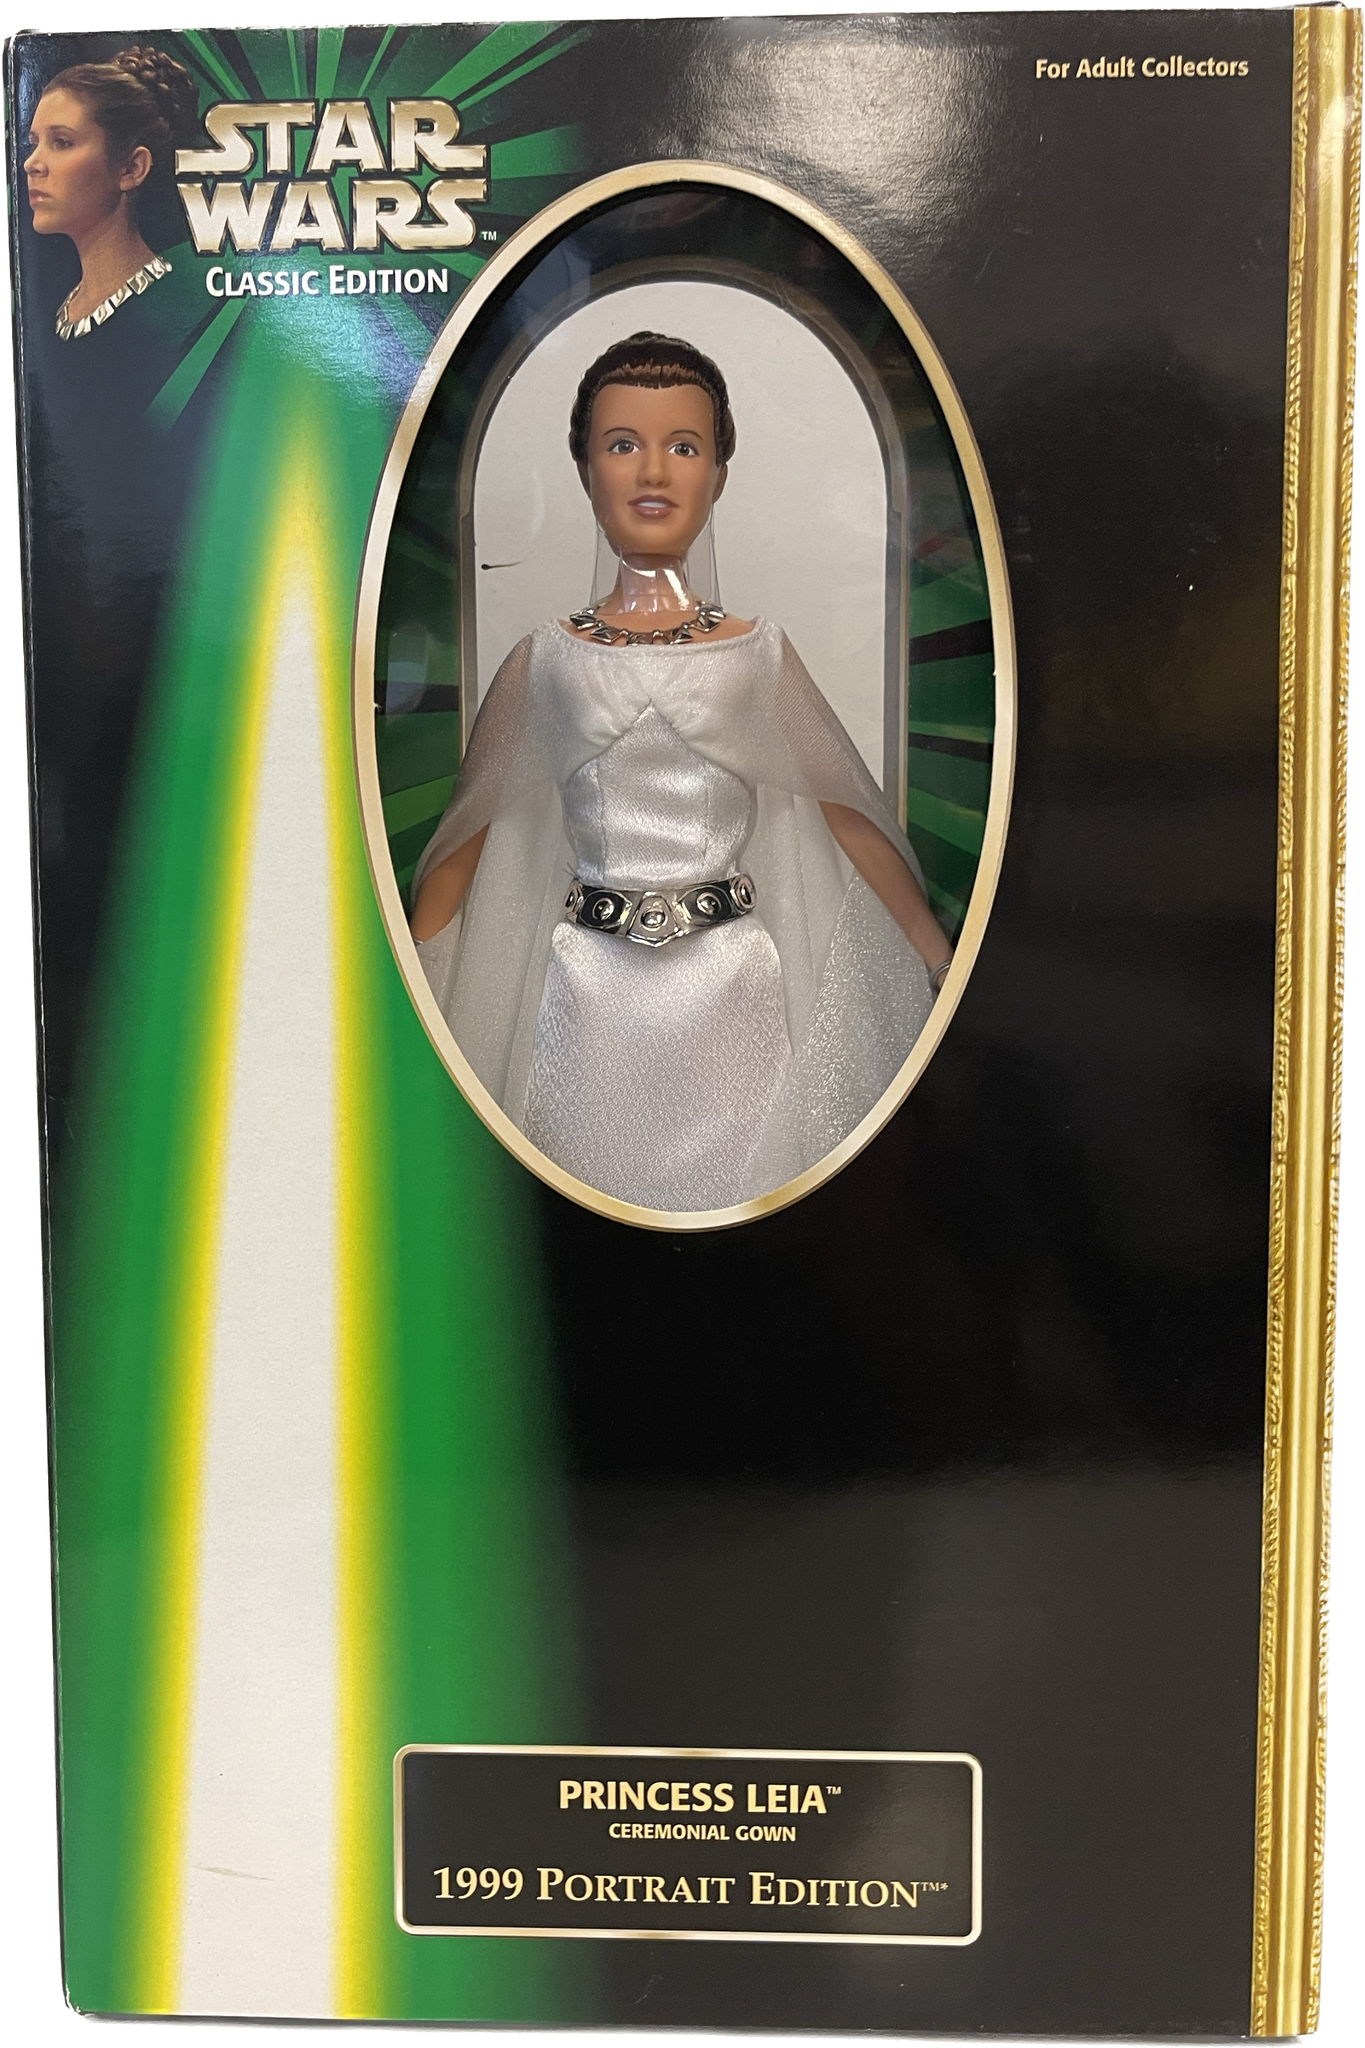 Star Wars 1999 Portrait Edition 12 inch Princess Leia in Ceremonial Gown